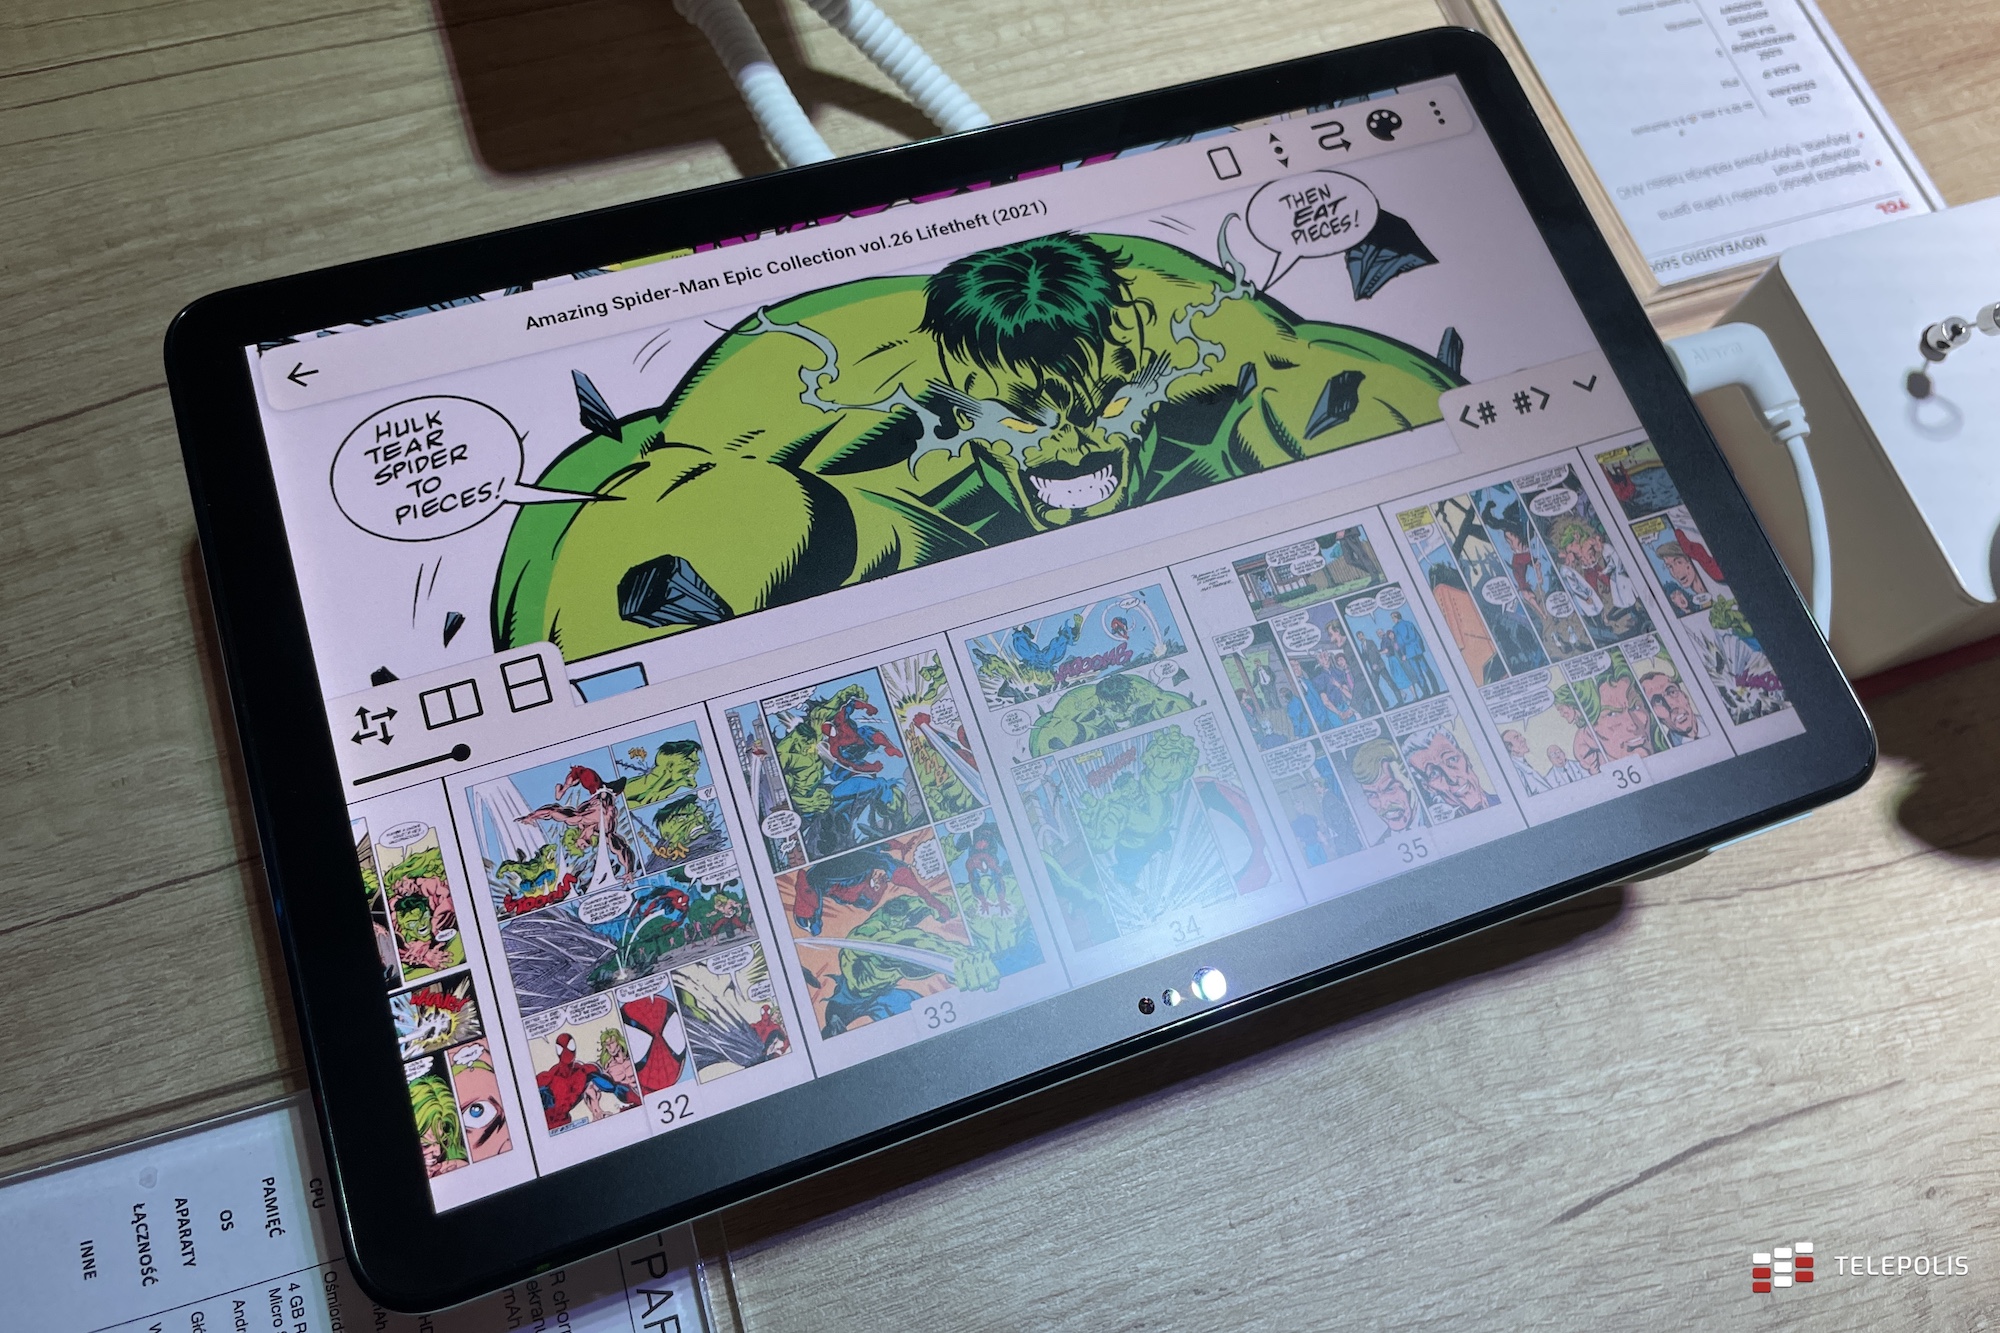 TCL NXTPAPER 10c - a tablet with a proprietary matte LCD screen, designed for reading